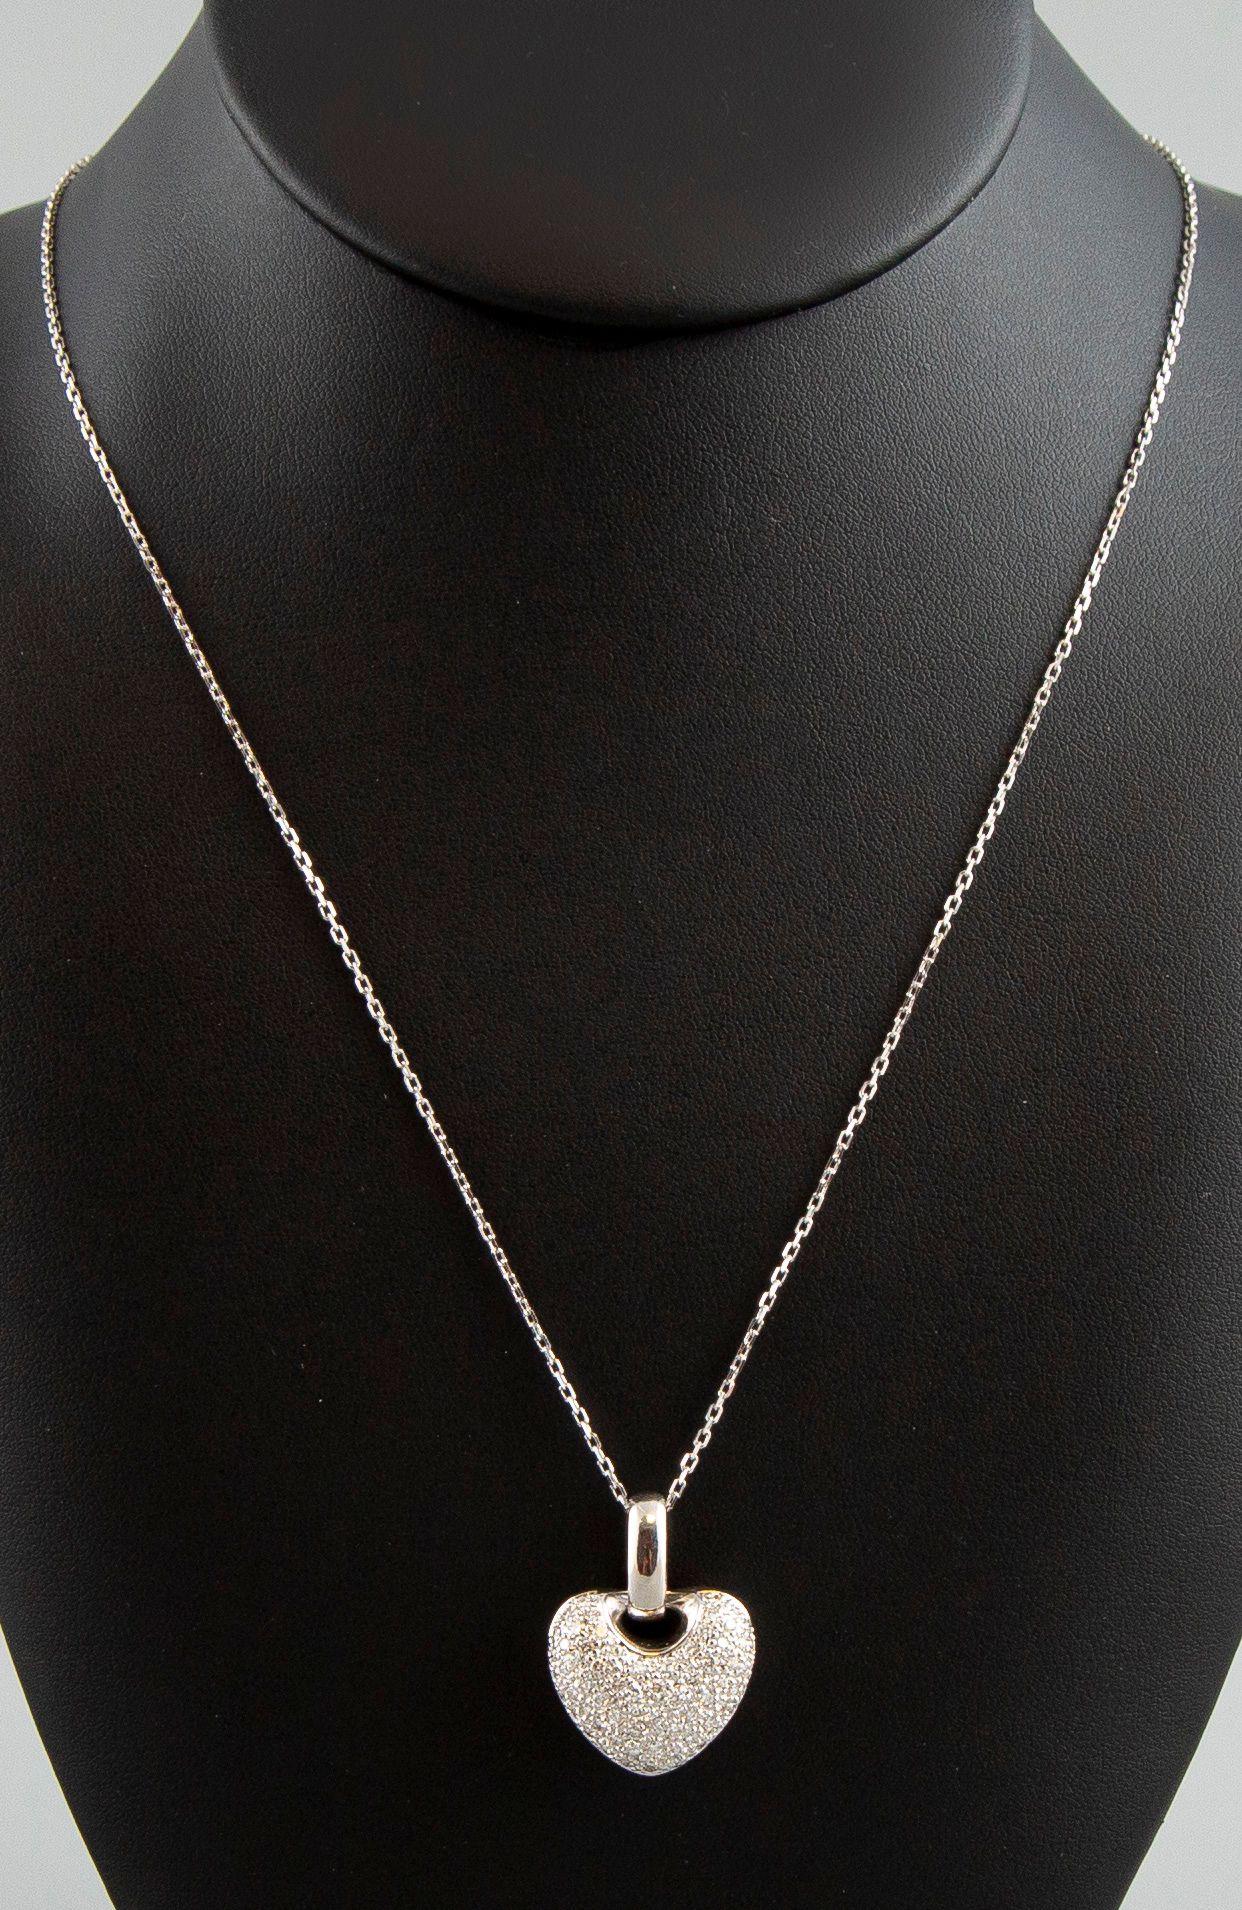 Null Long necklace in 18K white gold with diamond heart pendant (approx. 2 carat&hellip;